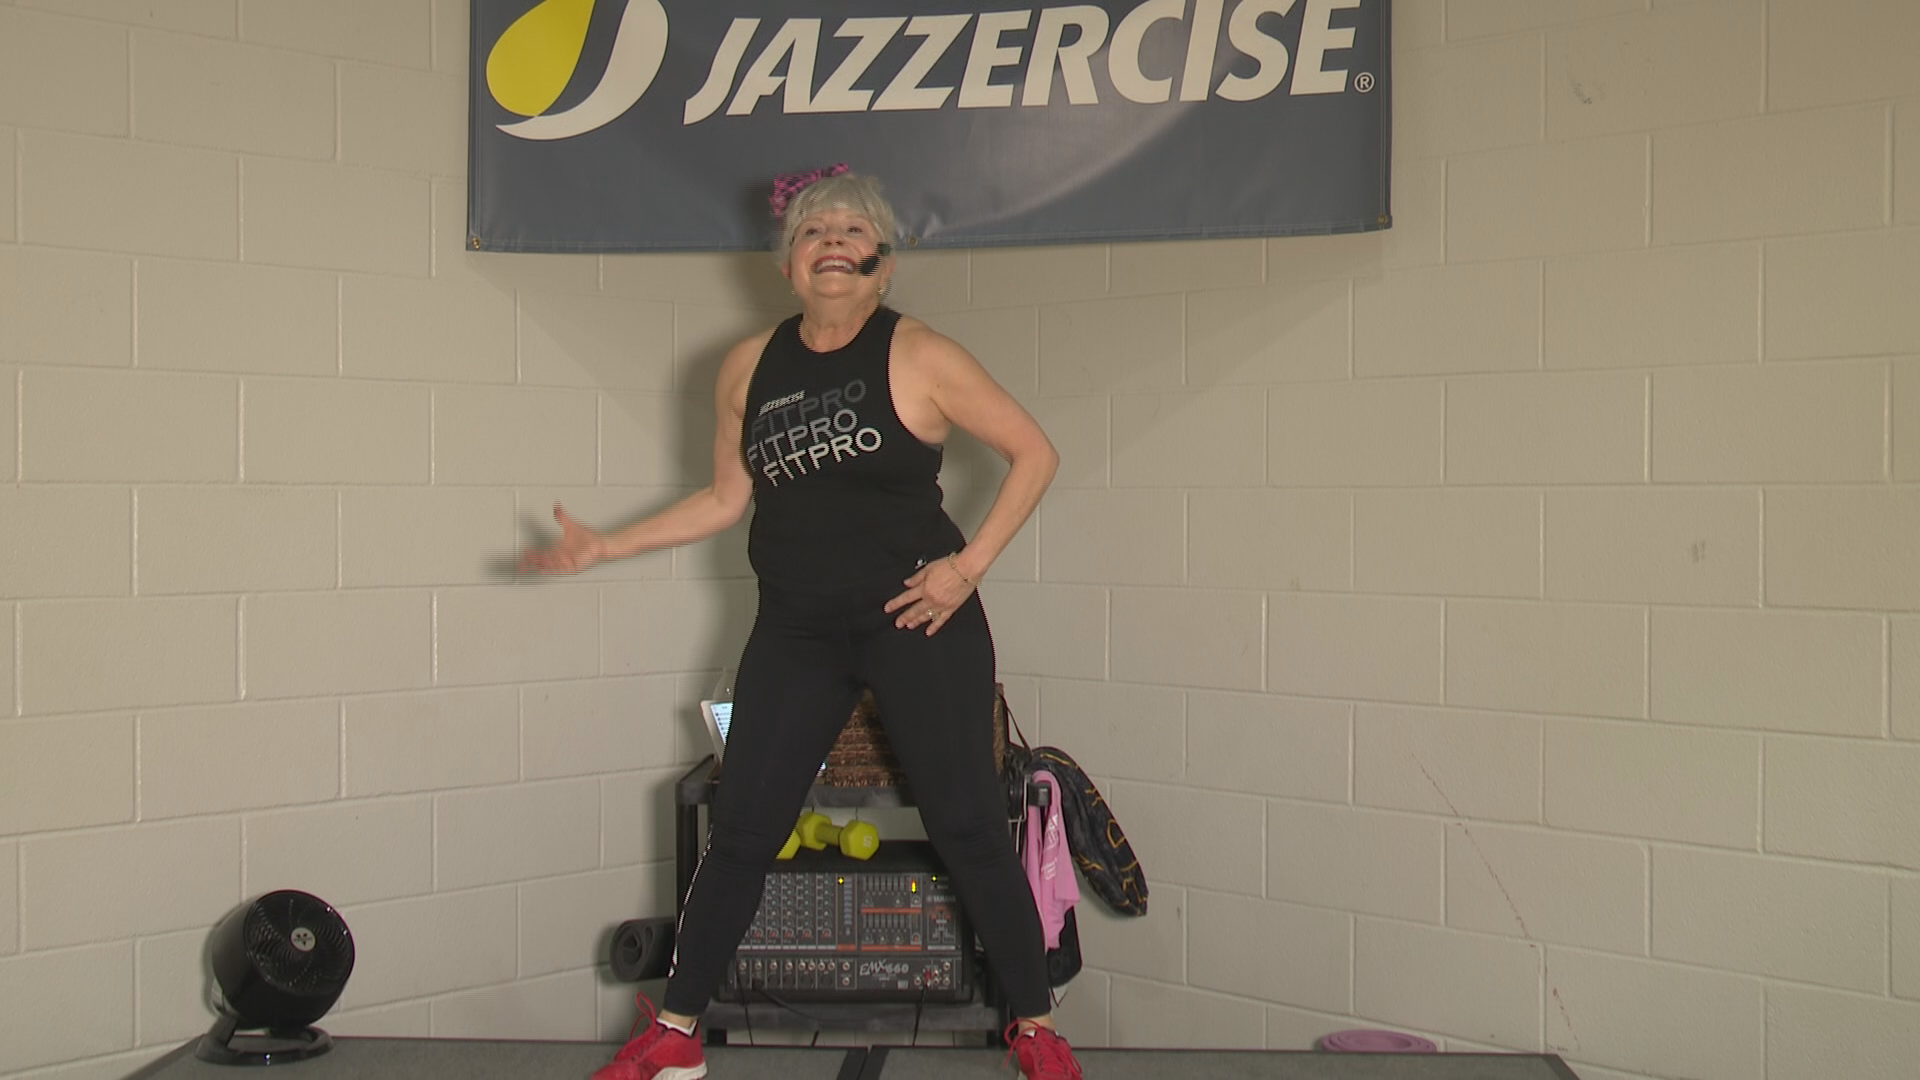 This is Cheryl. She's a 55 year old Jazzercise instructor. Think Jazzercise  works? You go, girl! Your abs are fab!